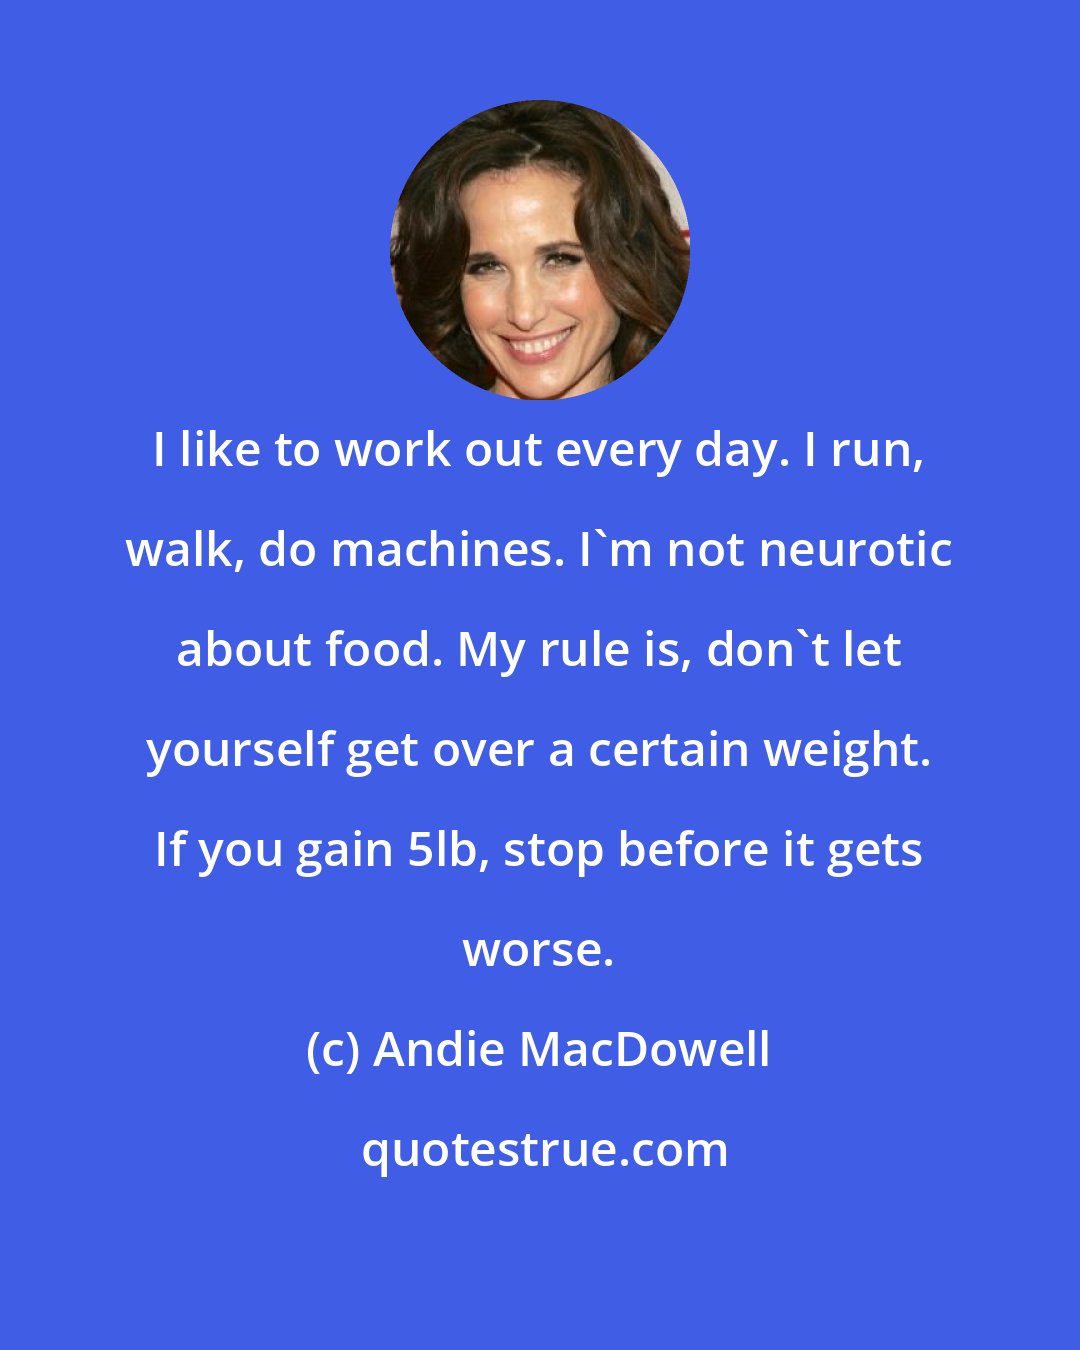 Andie MacDowell: I like to work out every day. I run, walk, do machines. I'm not neurotic about food. My rule is, don't let yourself get over a certain weight. If you gain 5lb, stop before it gets worse.